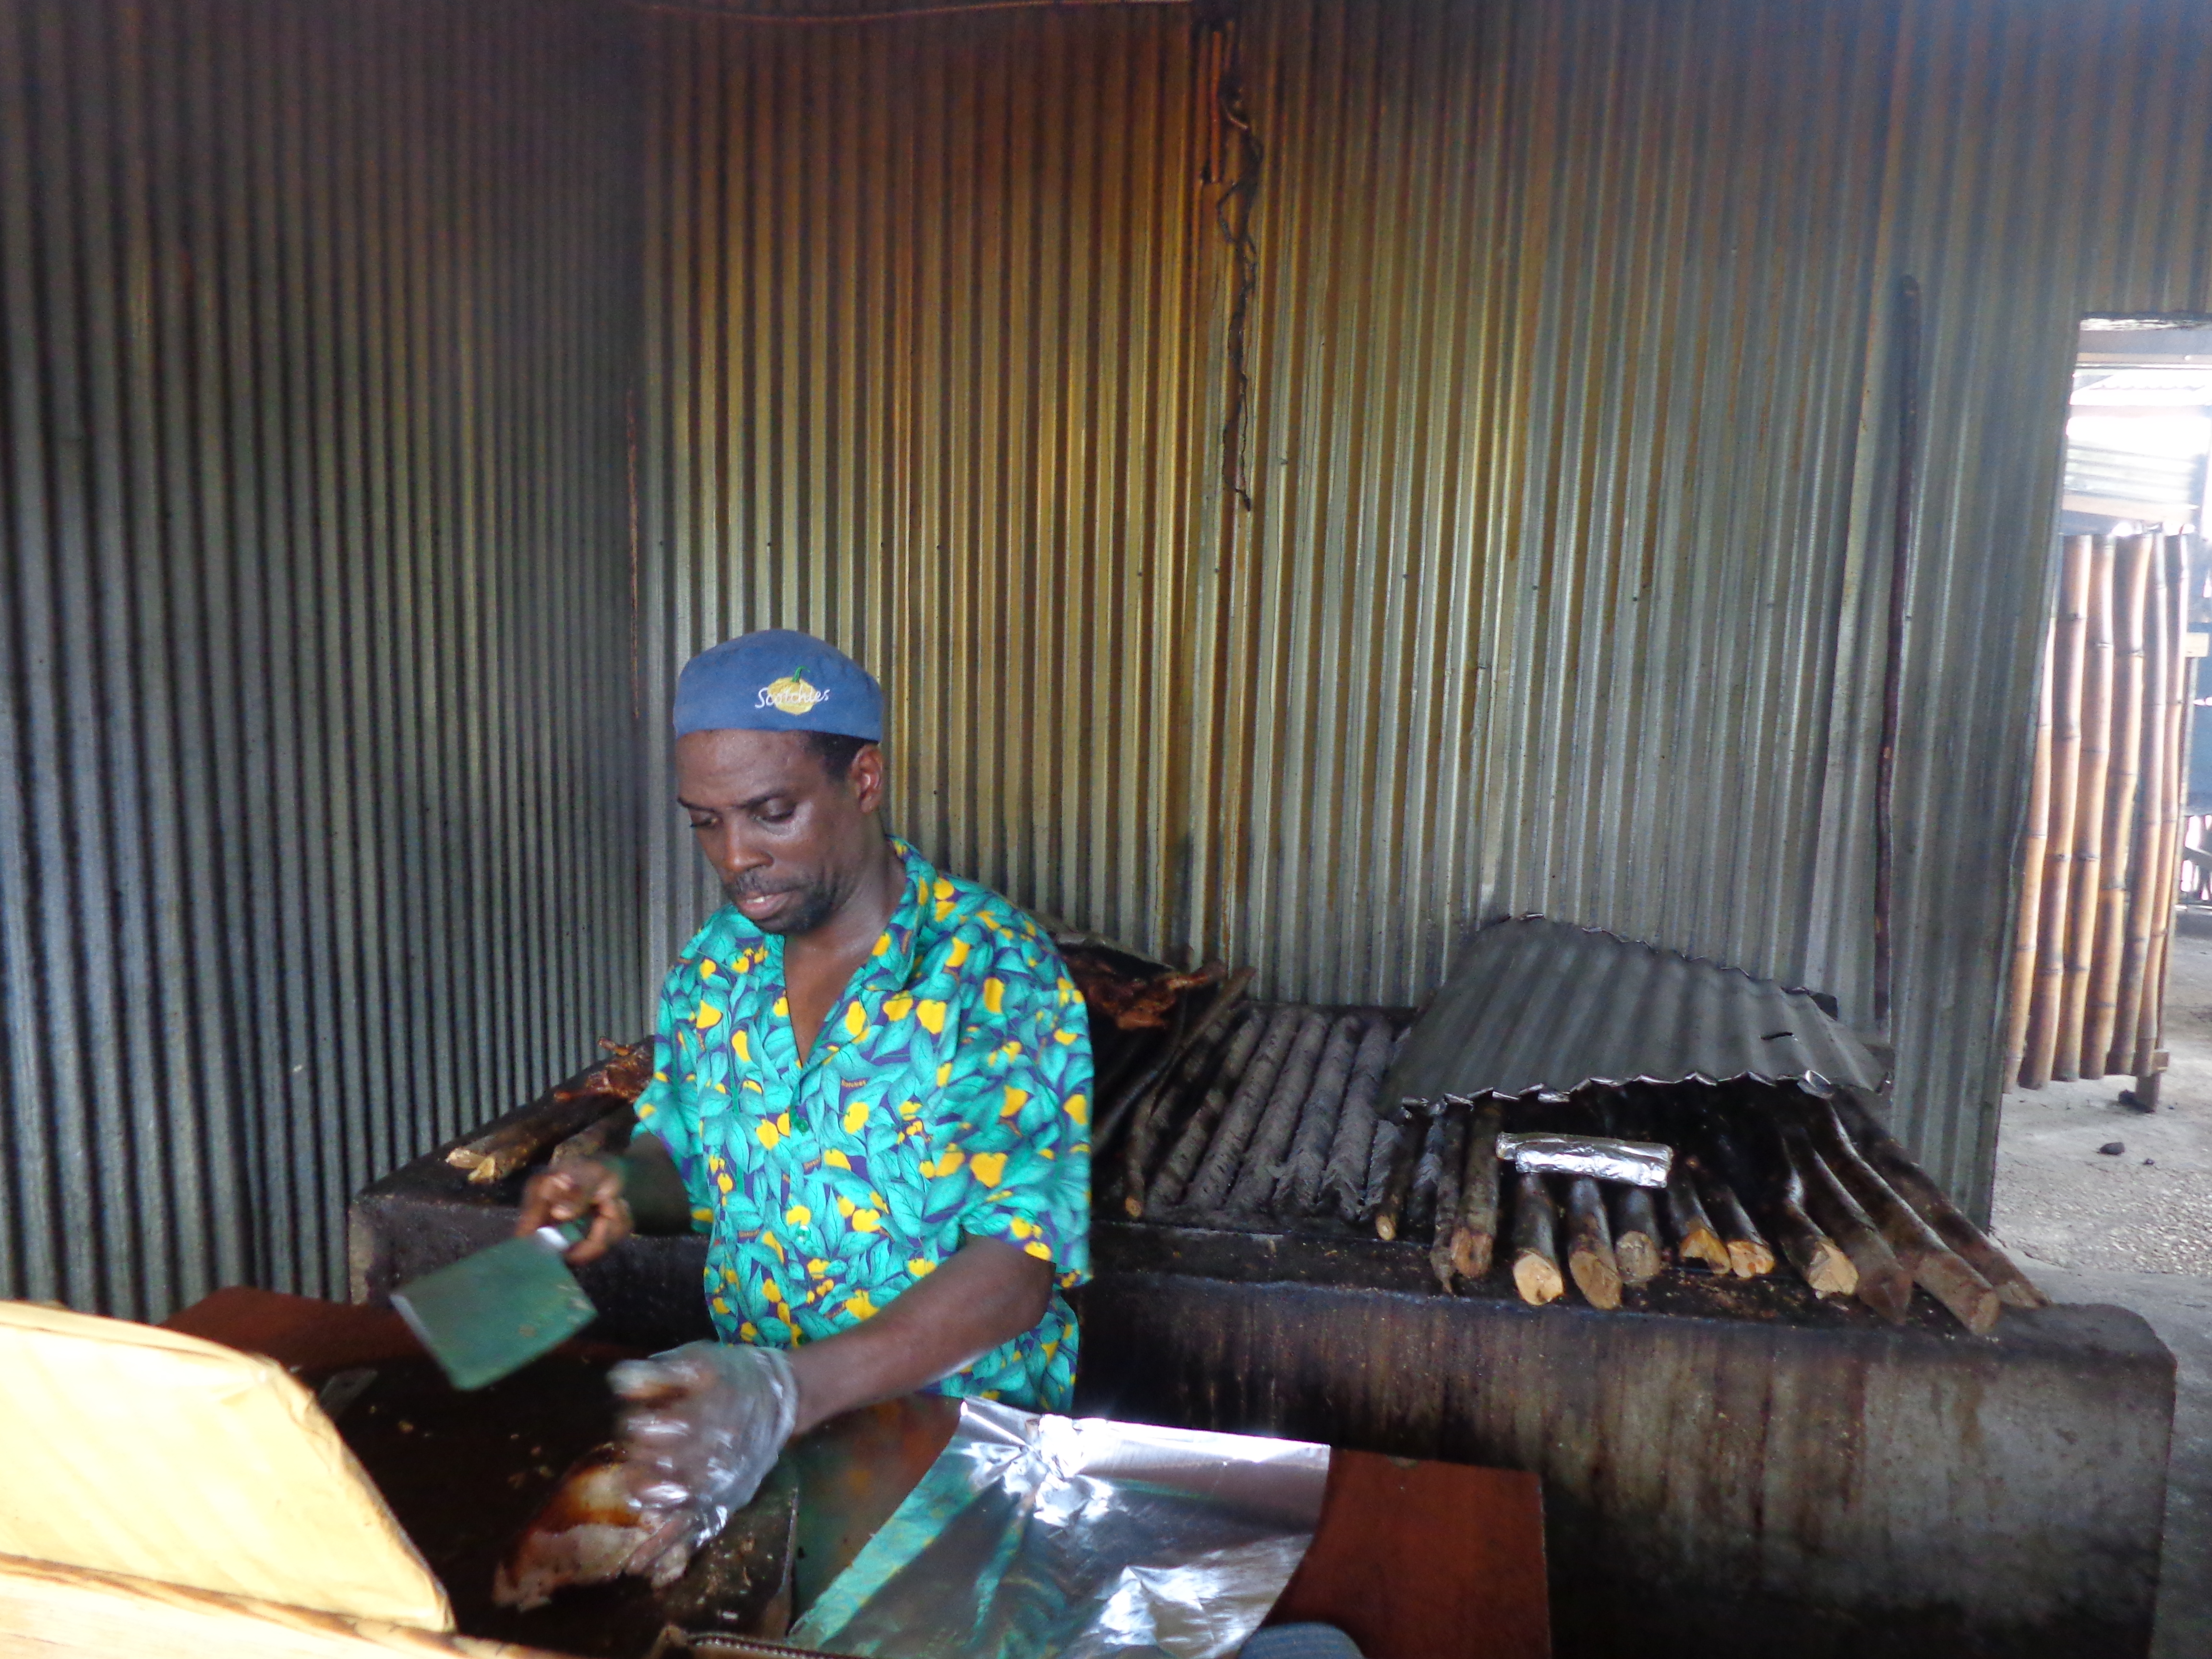 We stopped for some of the famous Jerk Chicken, basically roasted 